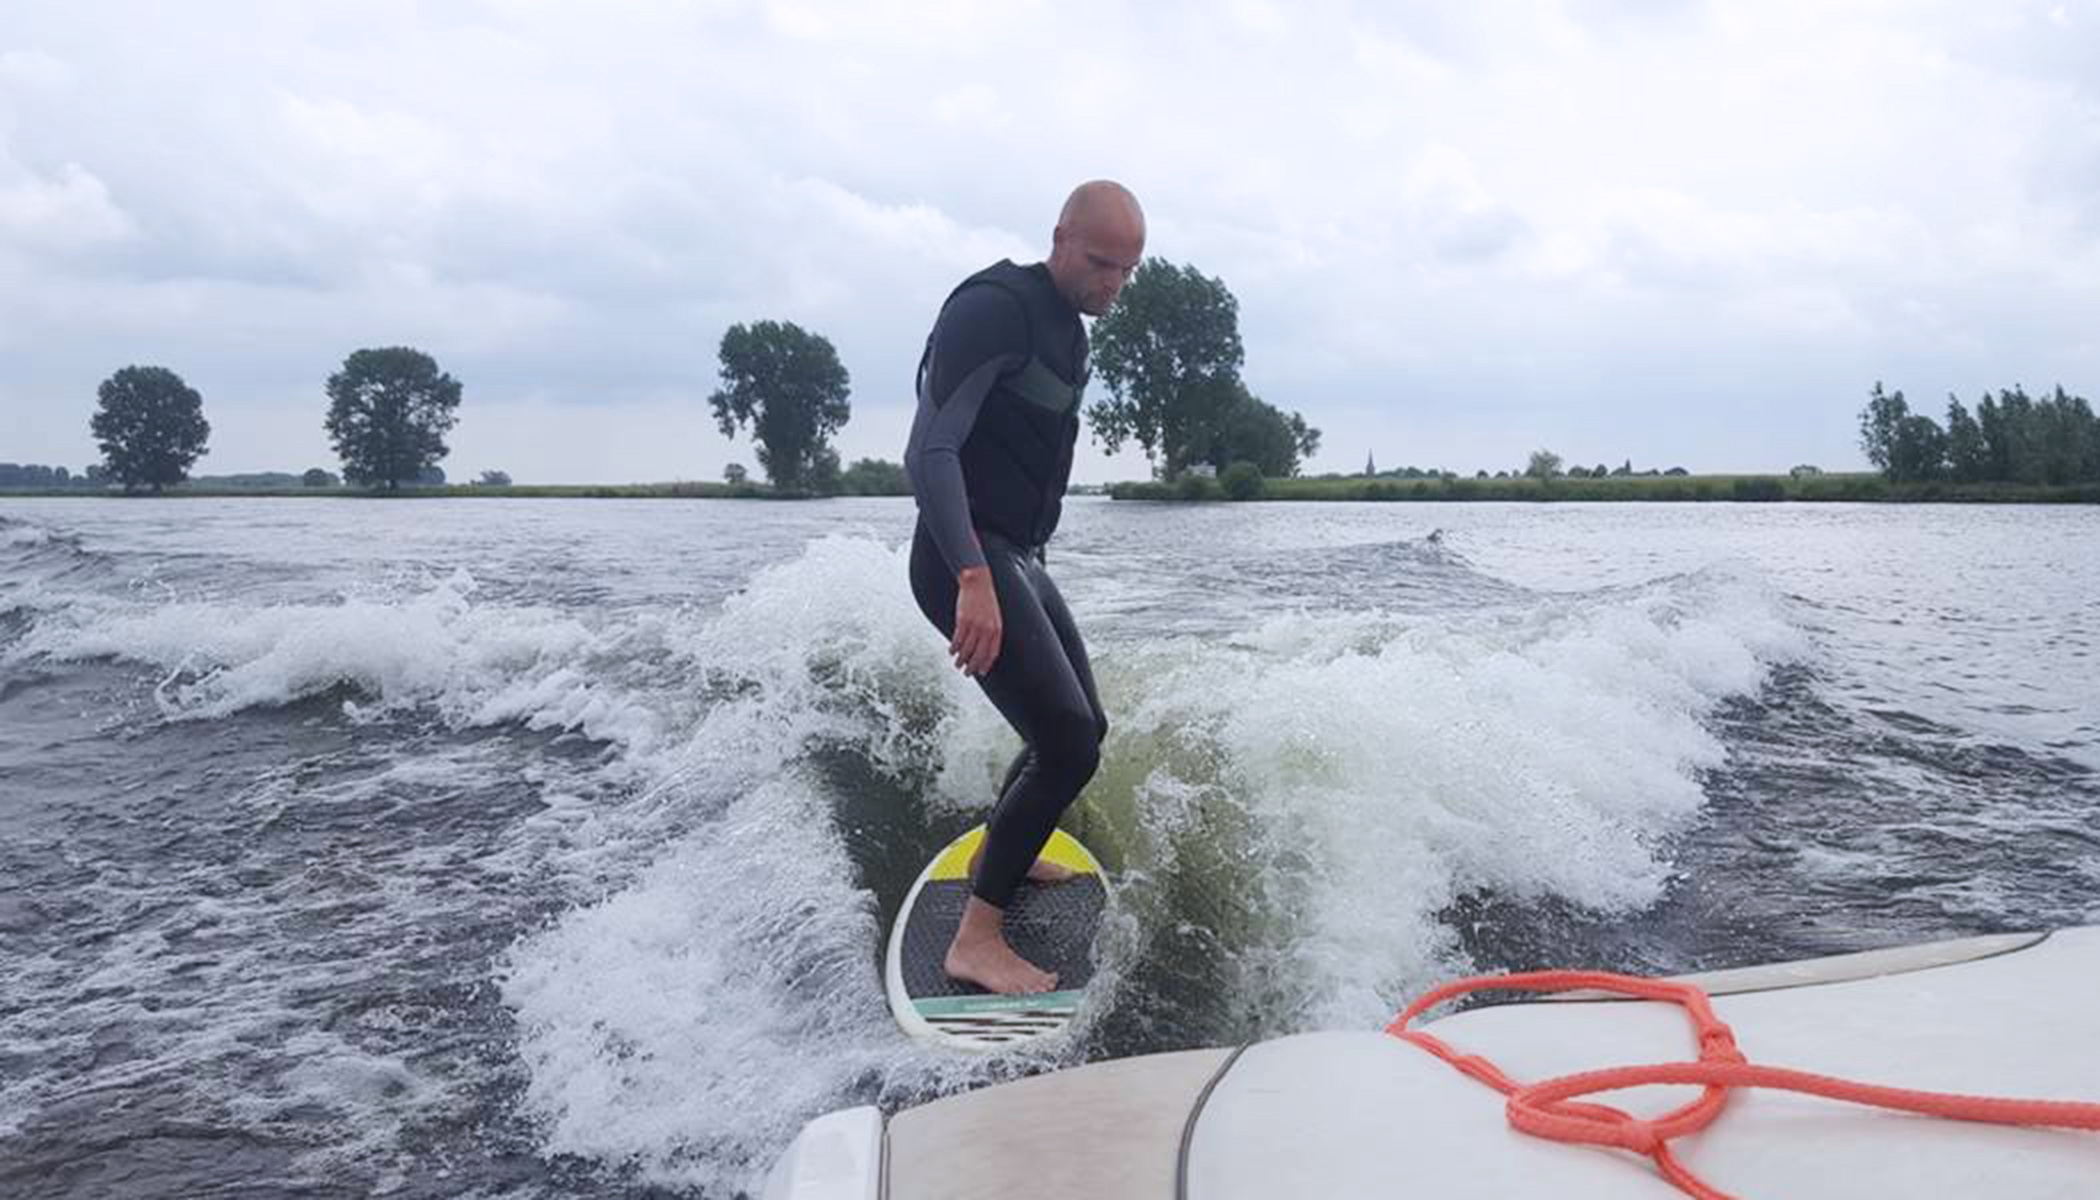 Testing the new wake surf boards